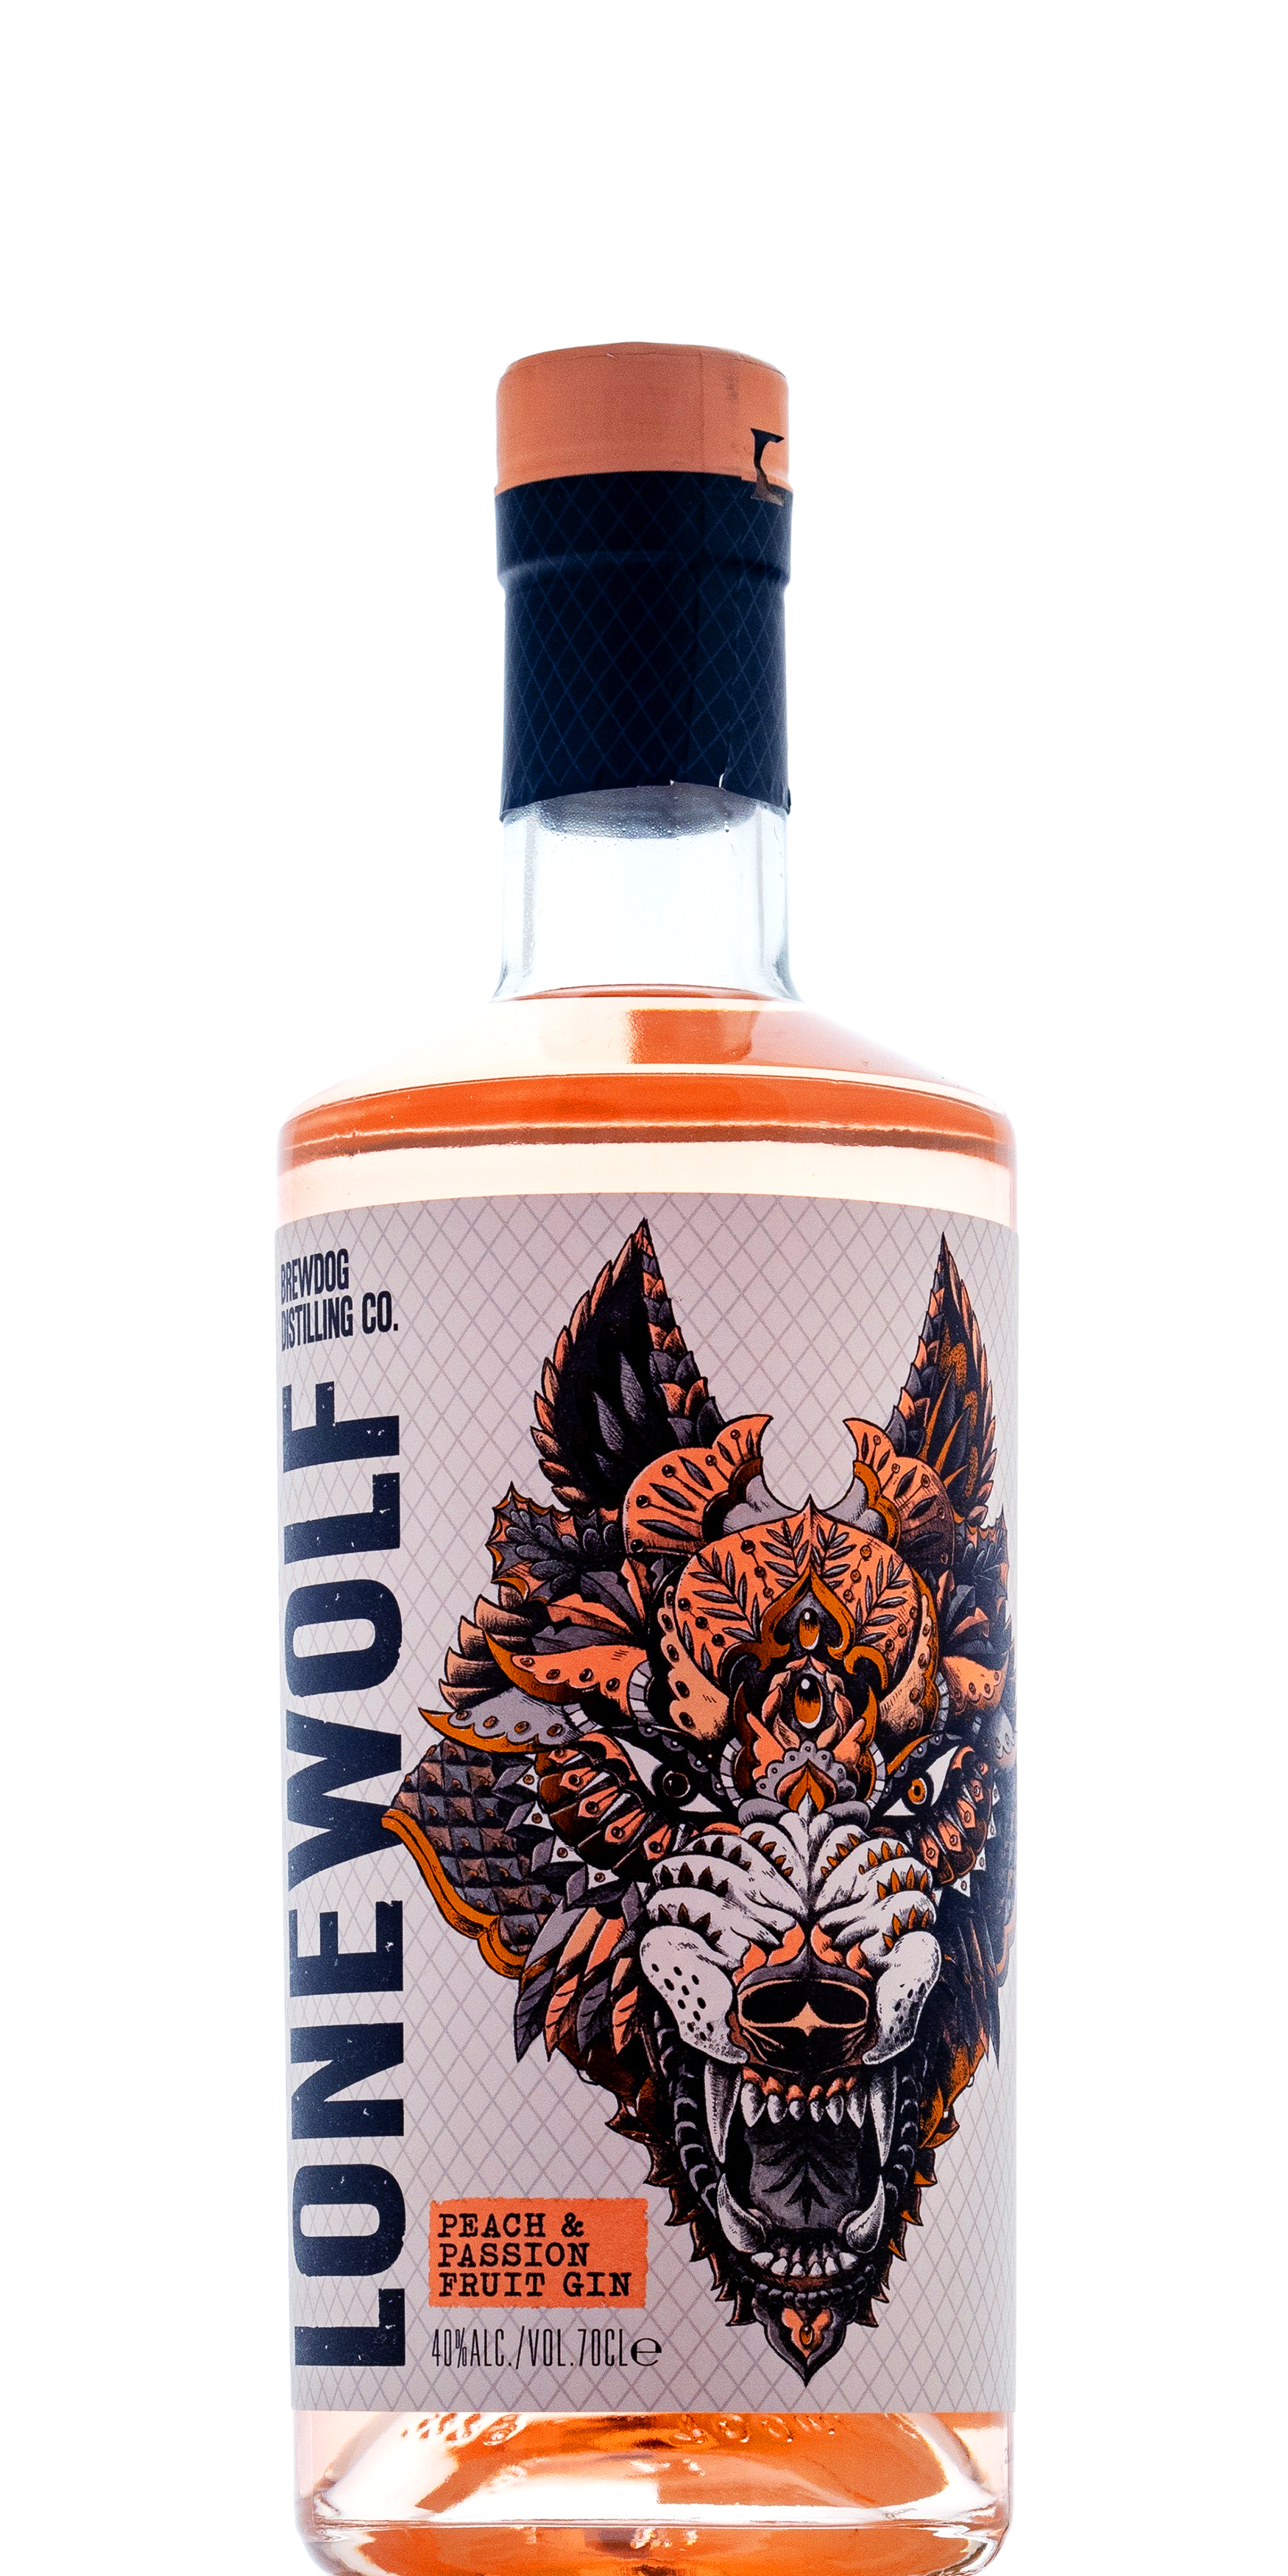 lonewolf-peach-passion-fruit-gin-700ml.png